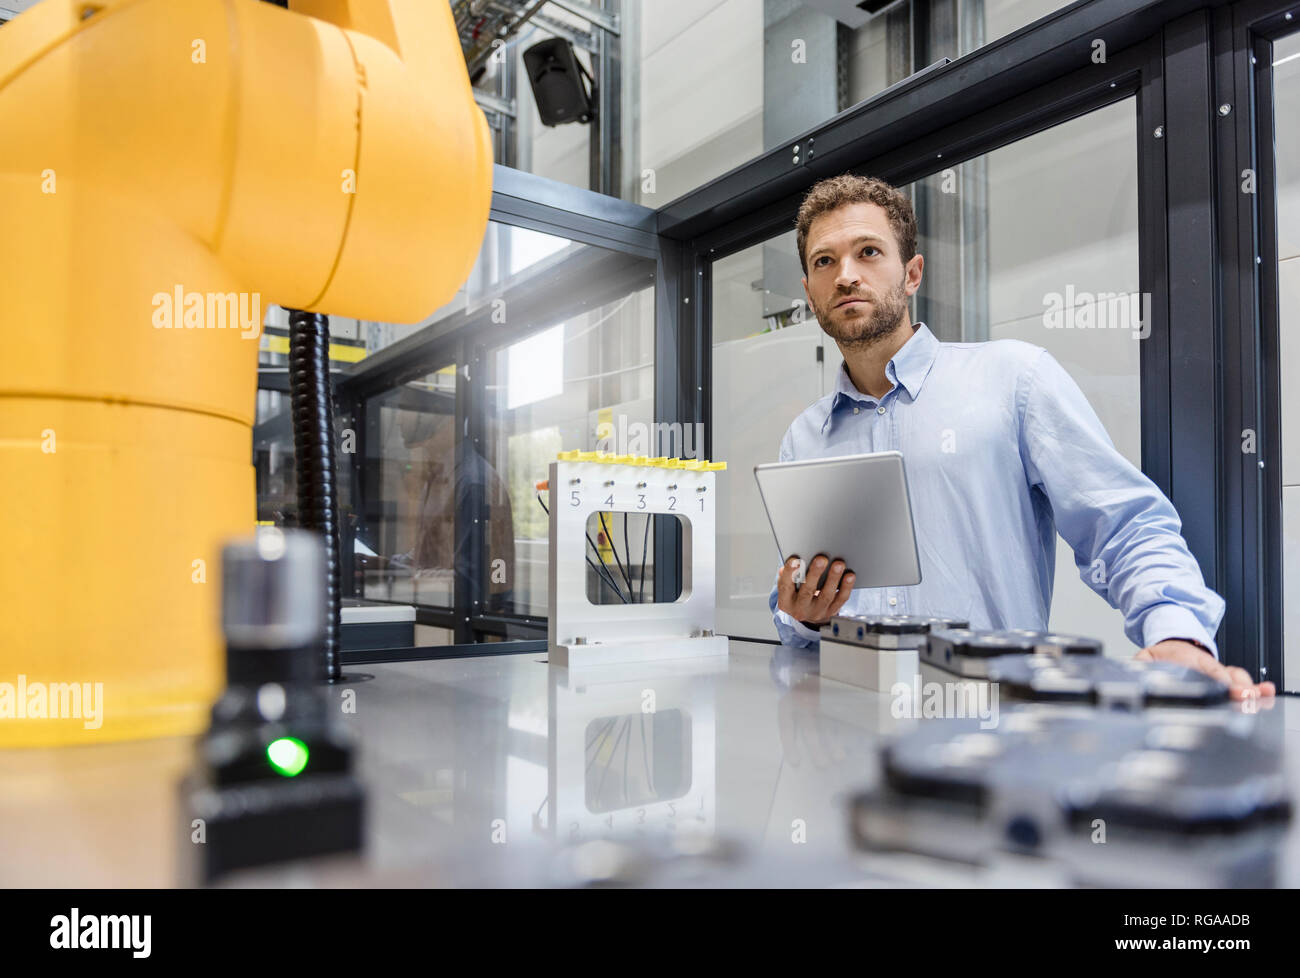 Businessman, working in a manufacturing company, using digital tablet Stock Photo